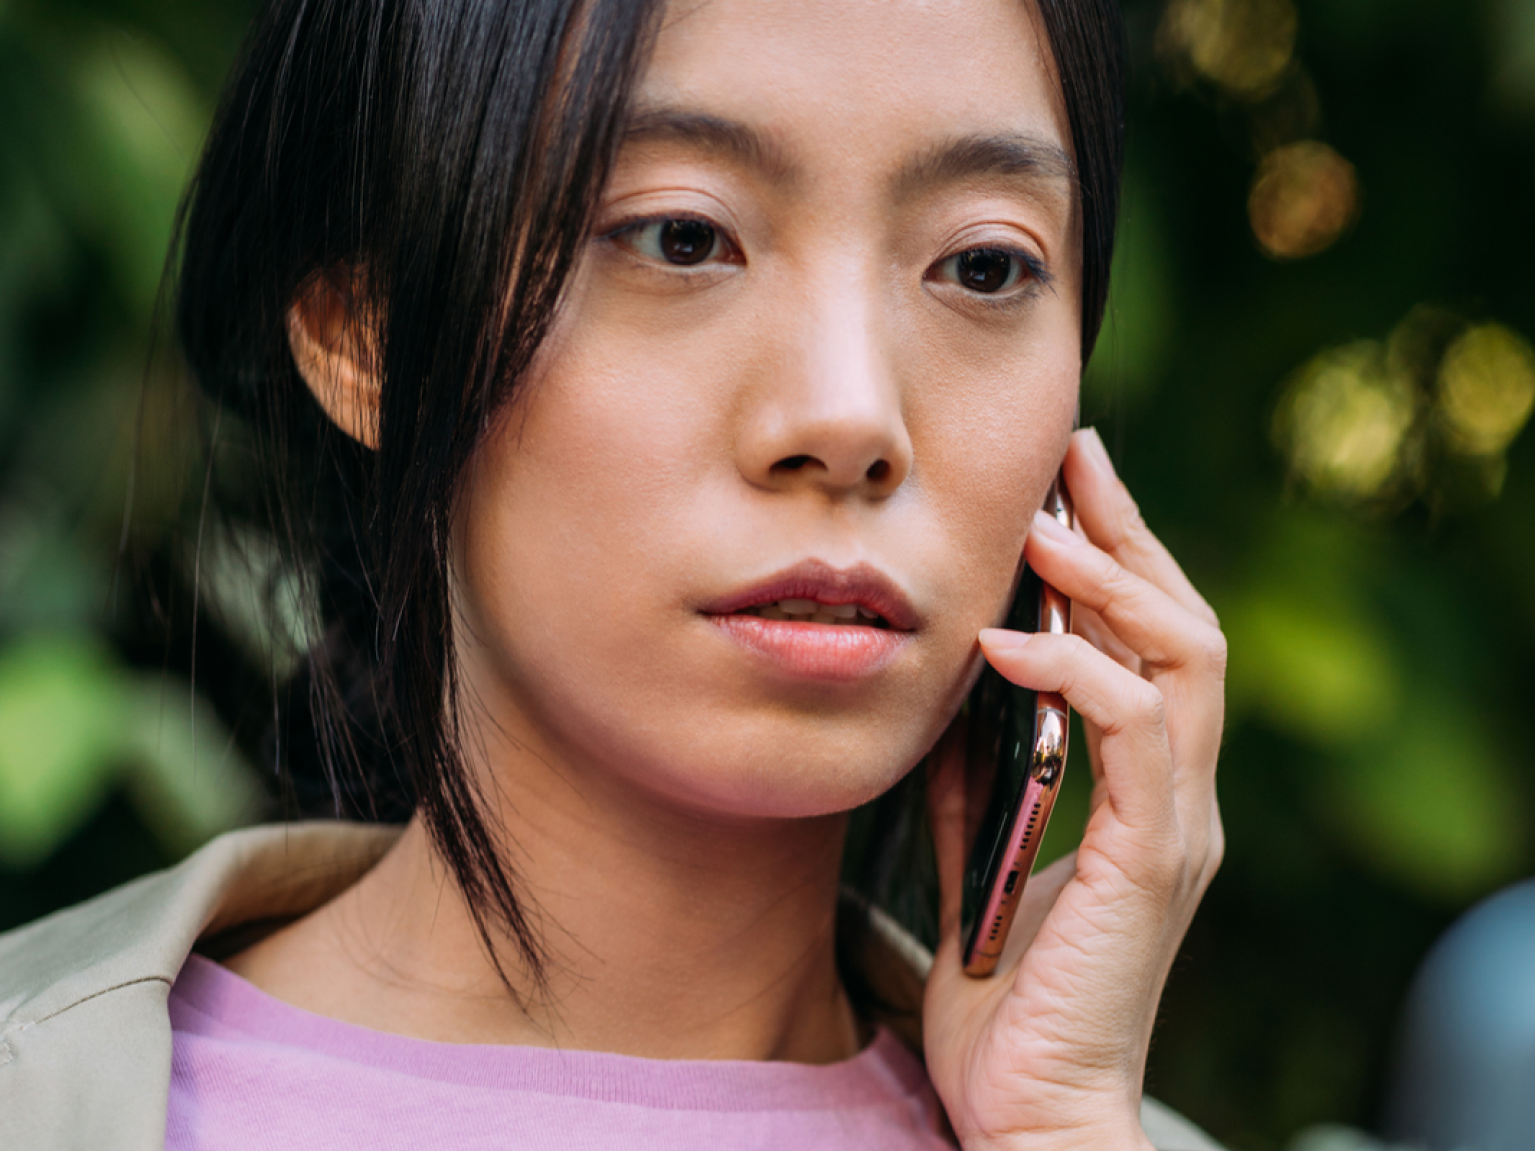 Image of a renter on the phone asking a renters insurance provider what's covered by renters insurance